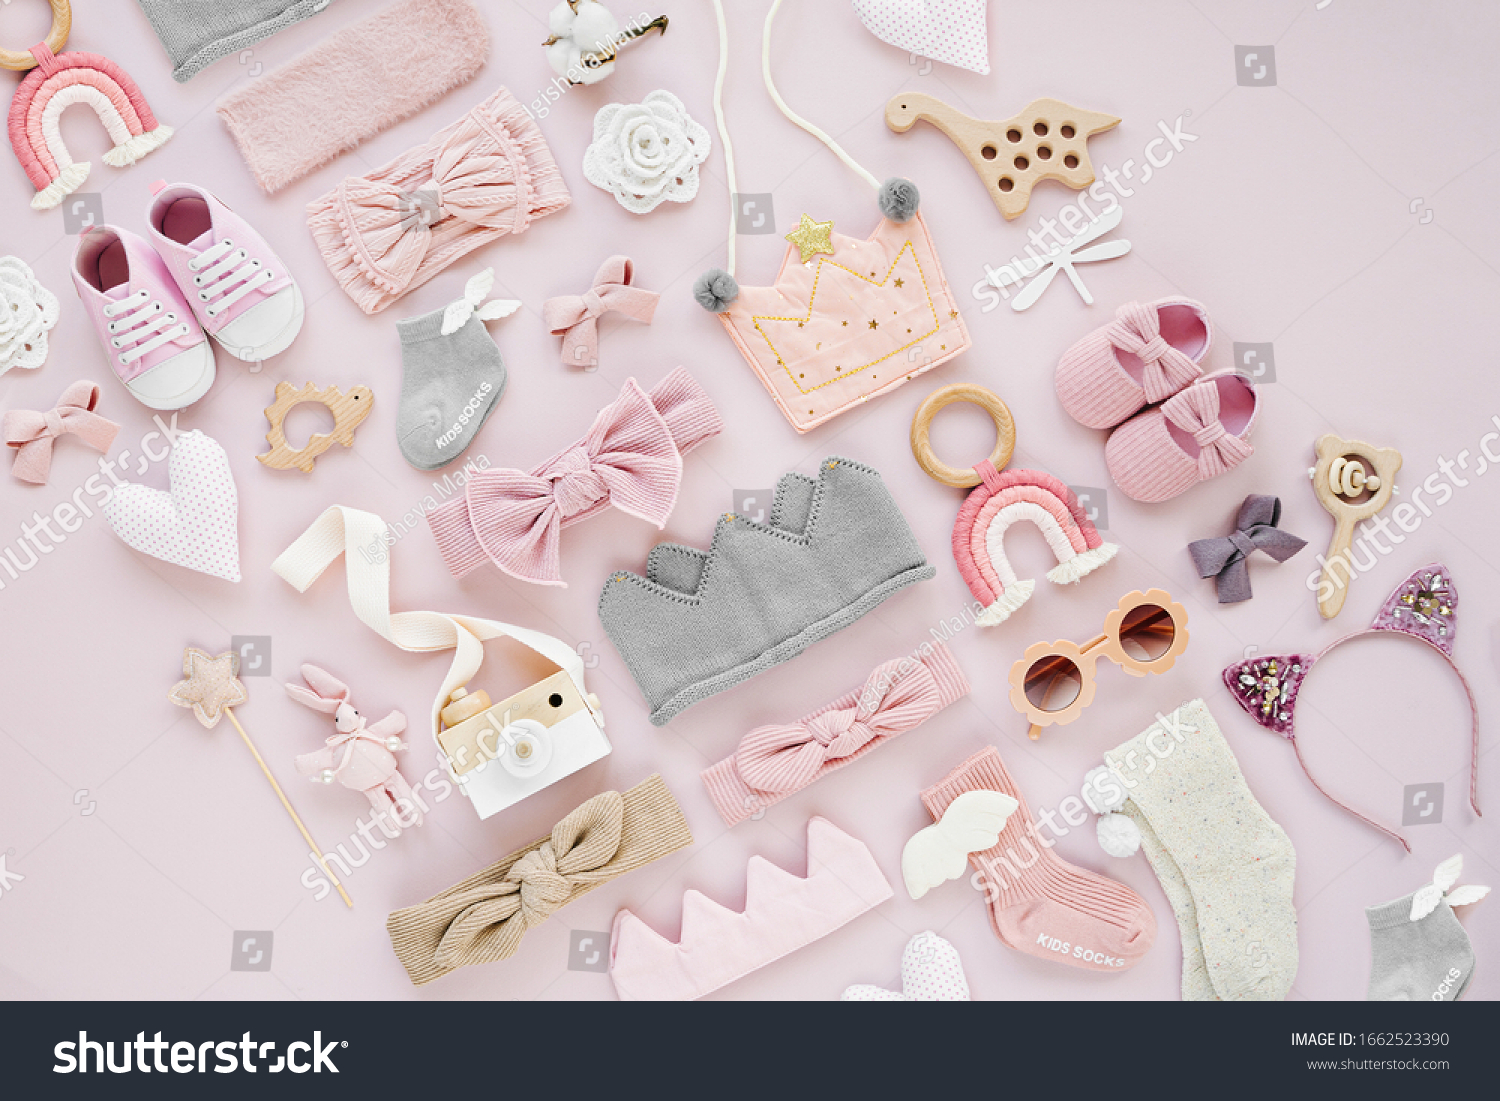 Set of  baby girl accessories on pink background. Various head band and hair bow, toy, little shoes, socks. Fashion kids stuff and accessories. Flat lay, top view #1662523390